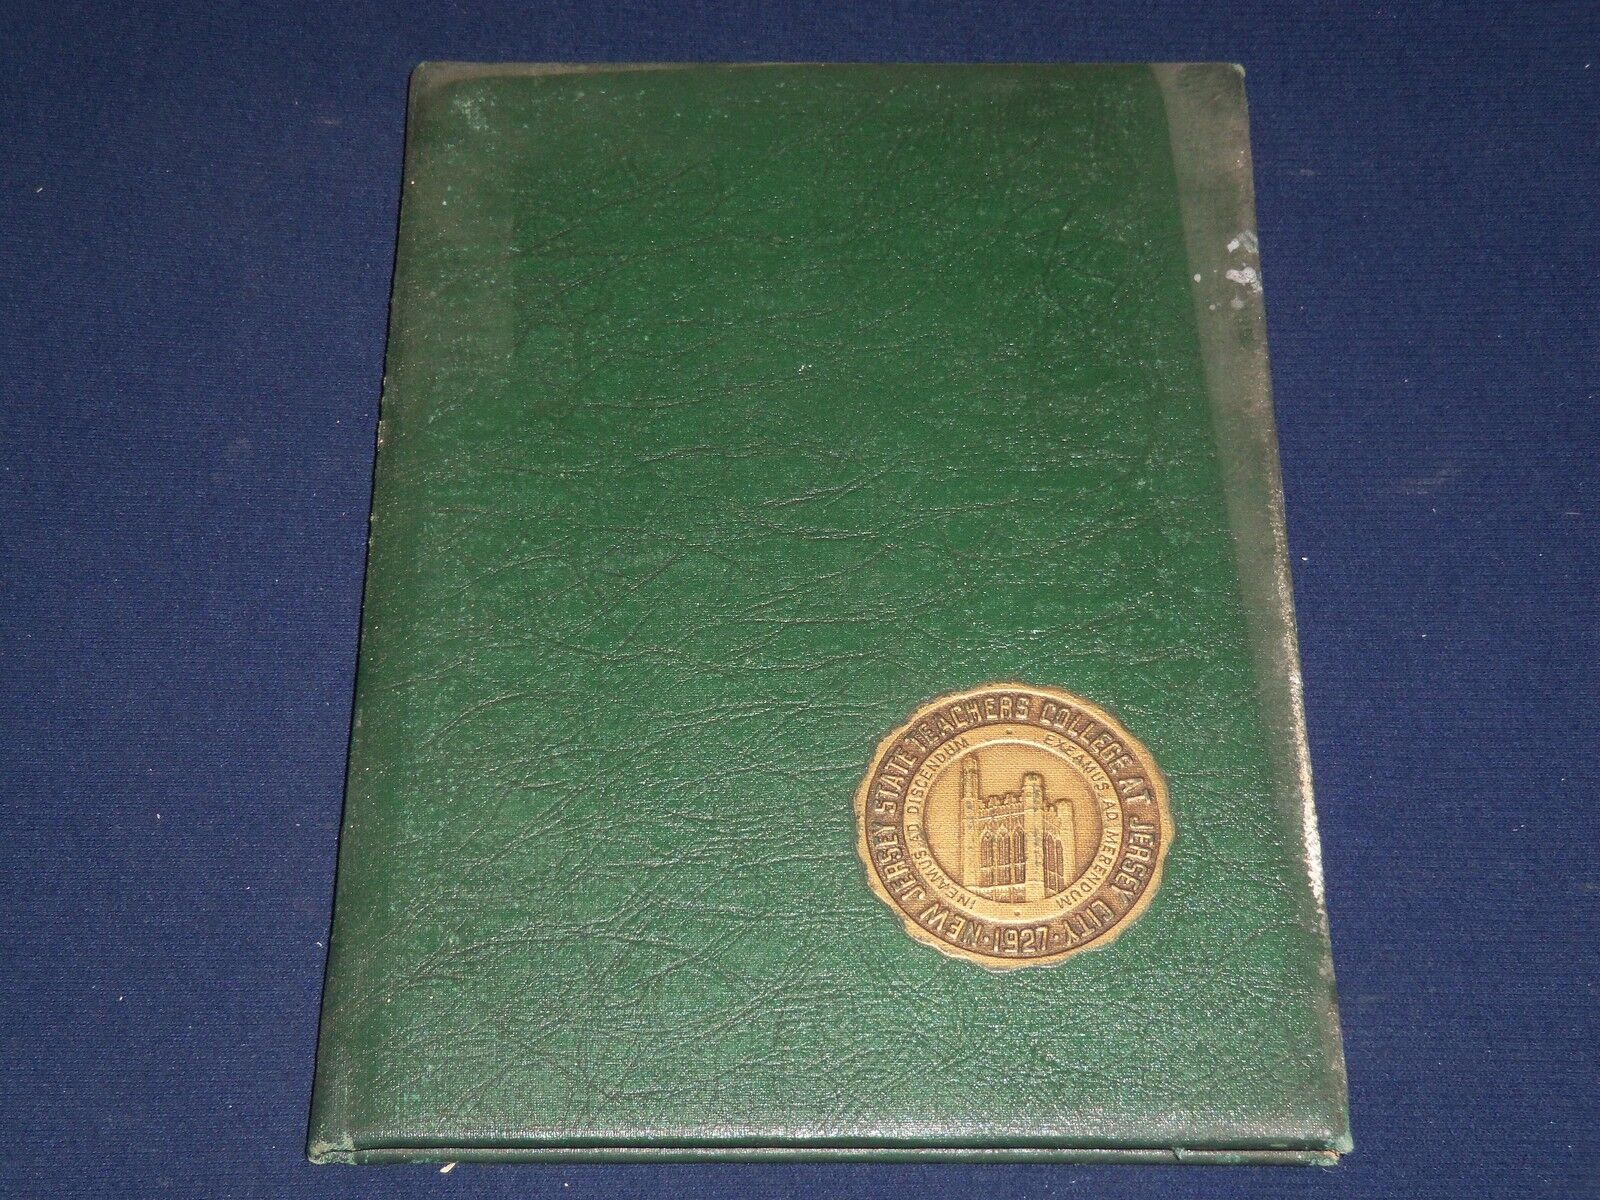 1947 TOWER JERSEY CITY NEW JERSEY STATE COLLEGE YEARBOOK - GREAT PHOTOS - YB 721